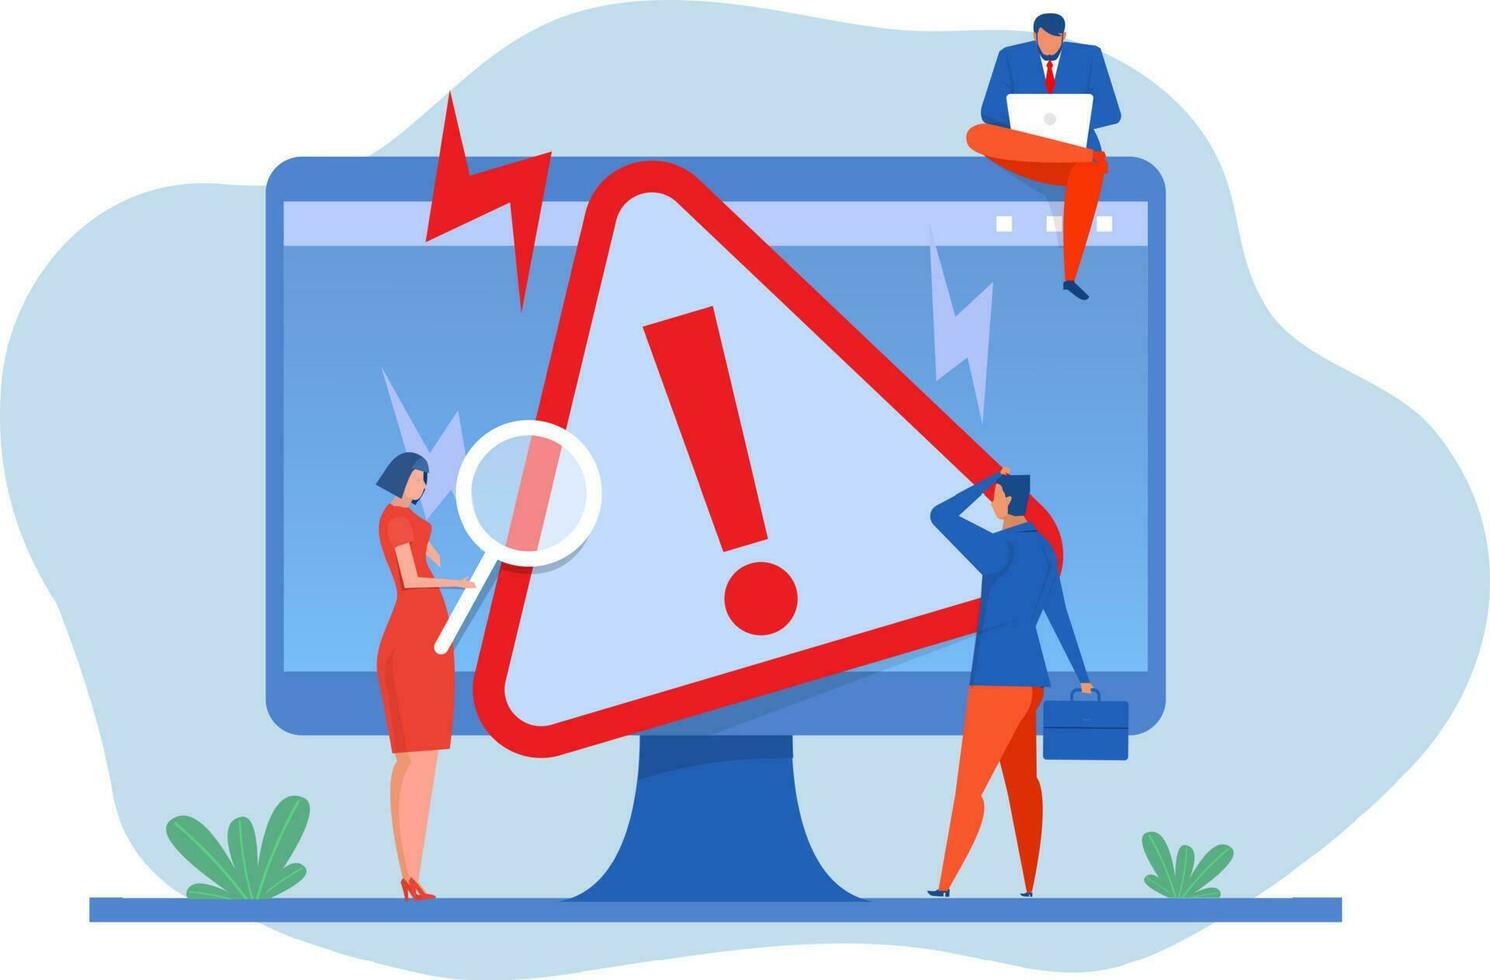 warning concept,people checking operating system error warning on web page, system alert or mistake wrong 404 error web pageflat vector illustration